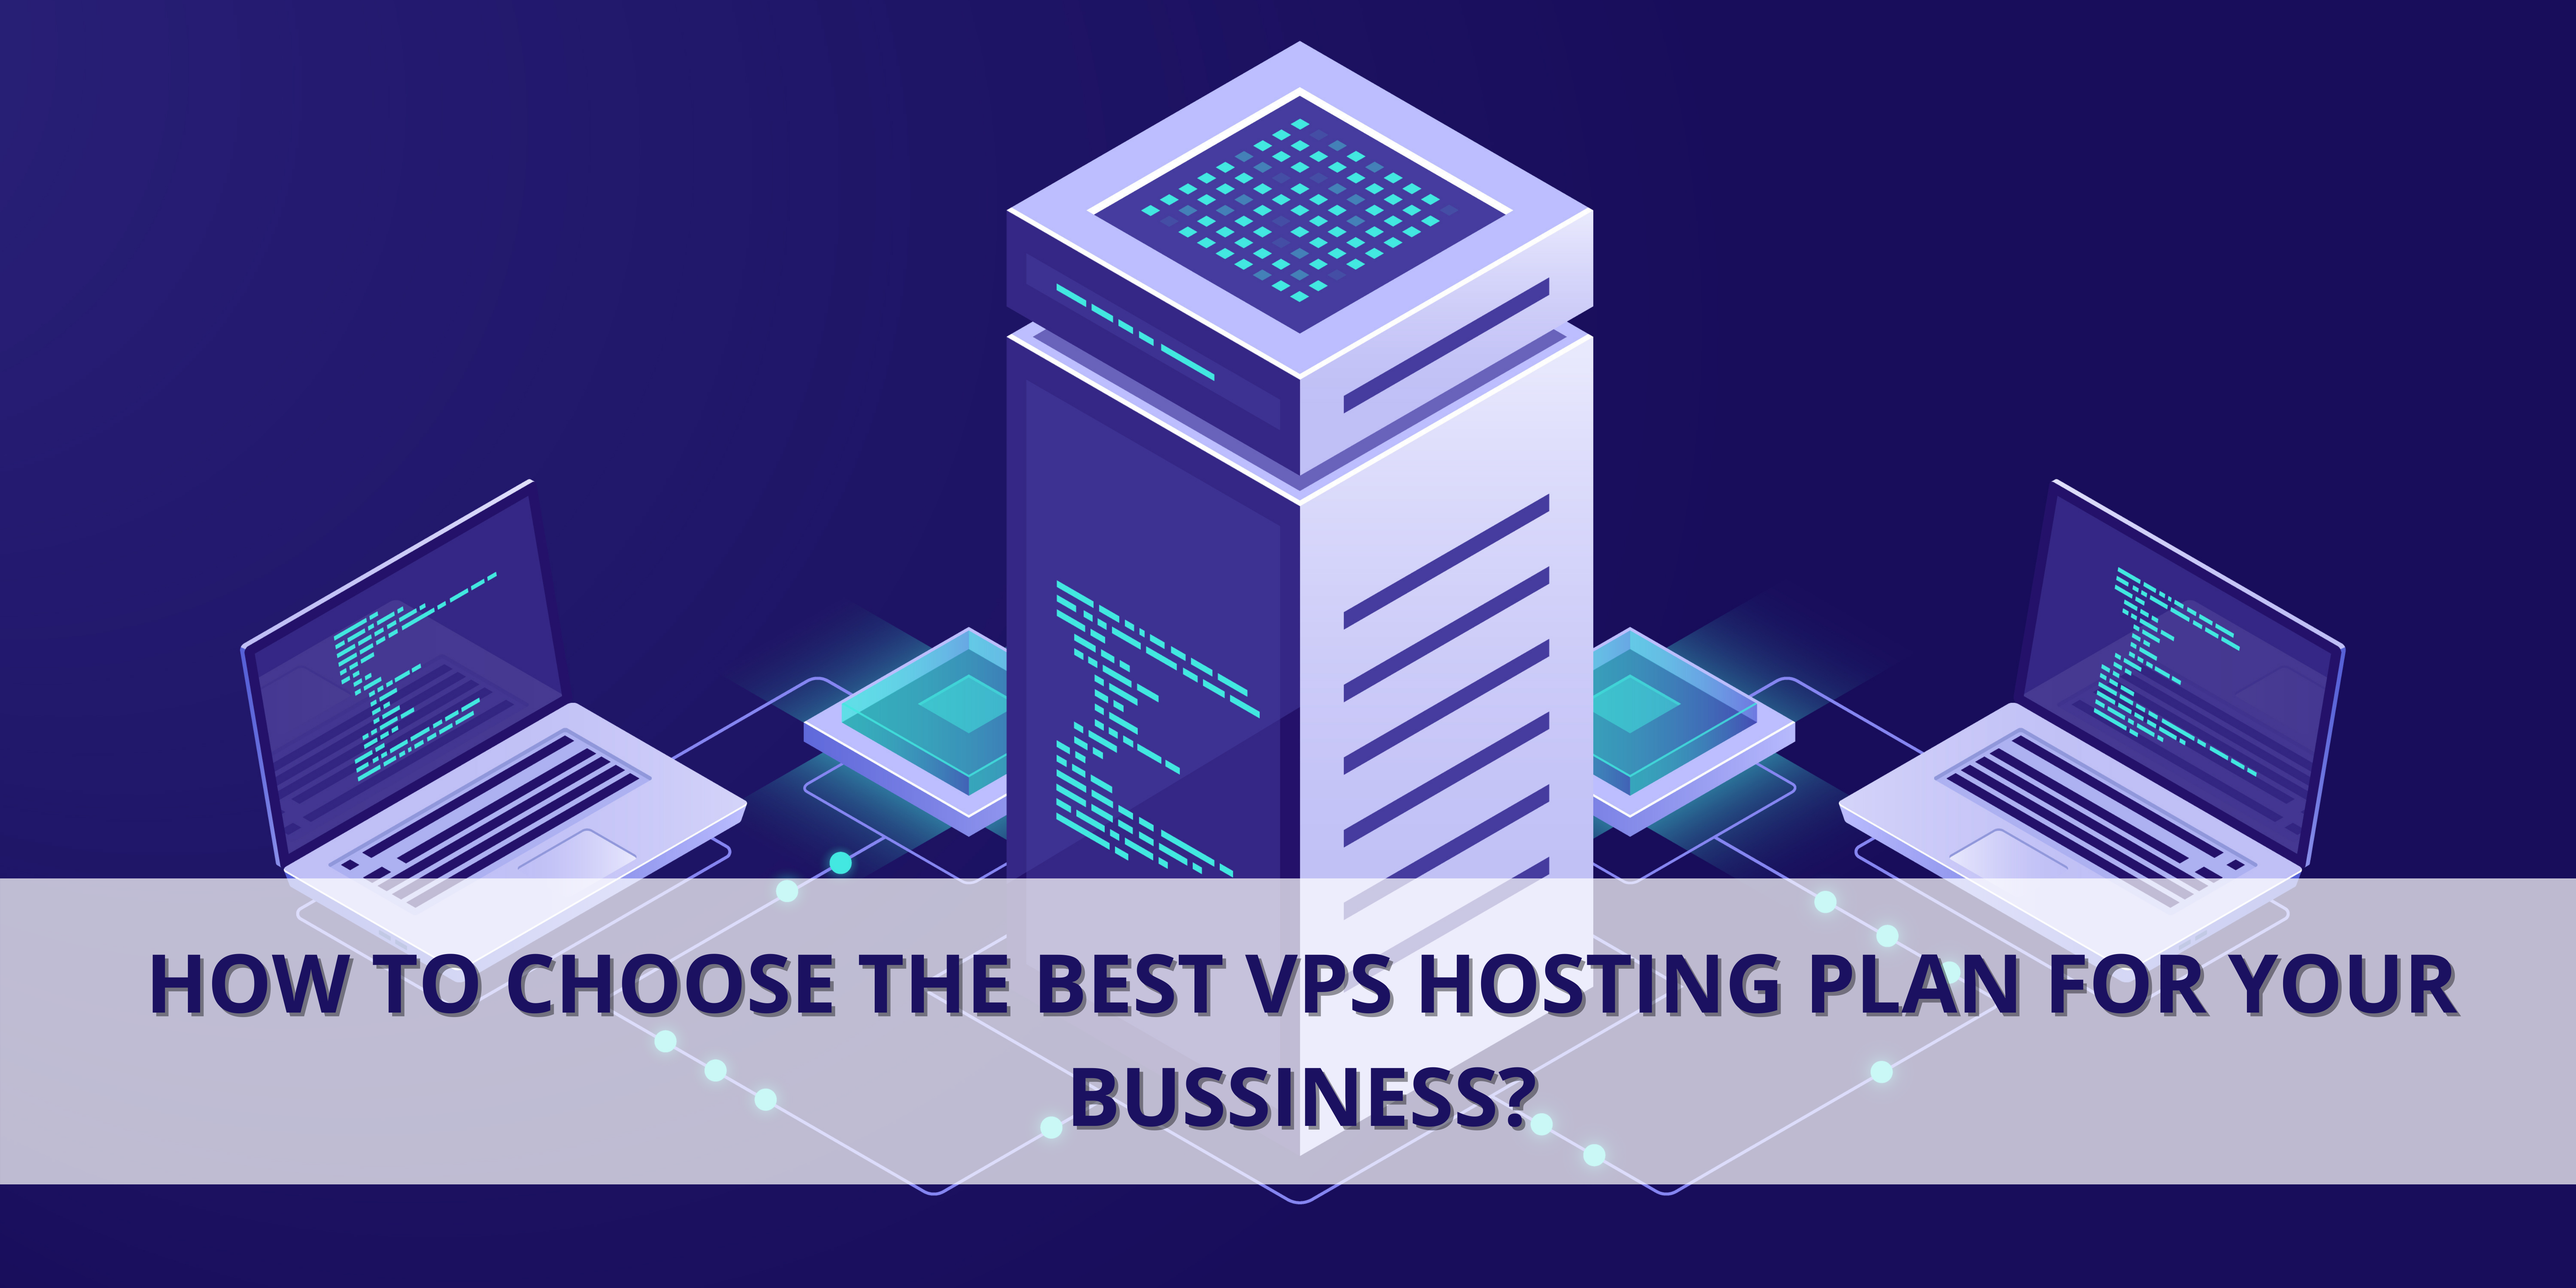 How To Choose The Best VPS Hosting Plan For Your Business?